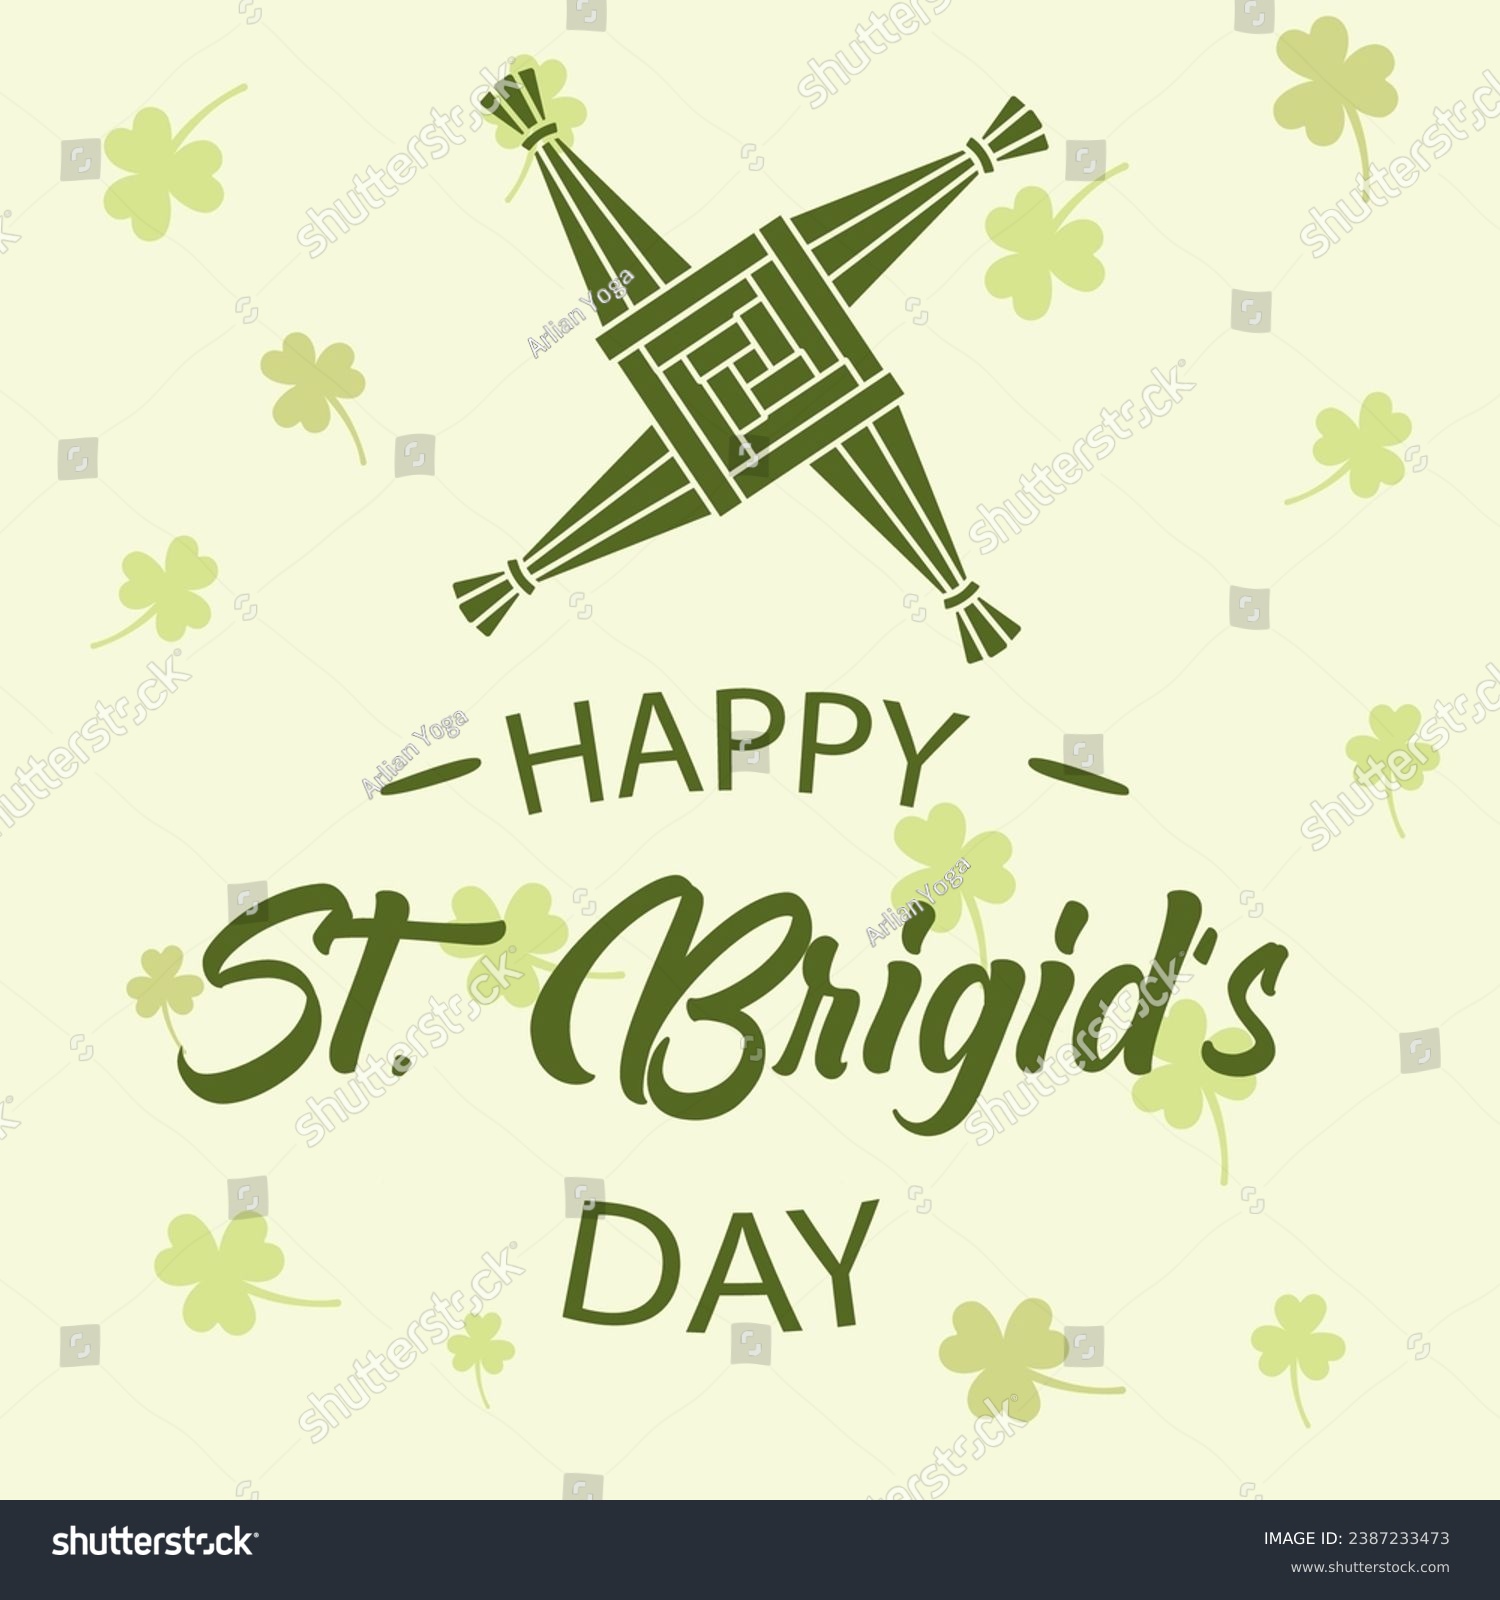 SVG of Happy St. Brigid’s Day. The Day of Ireland illustration vector background. Vector eps 10 svg